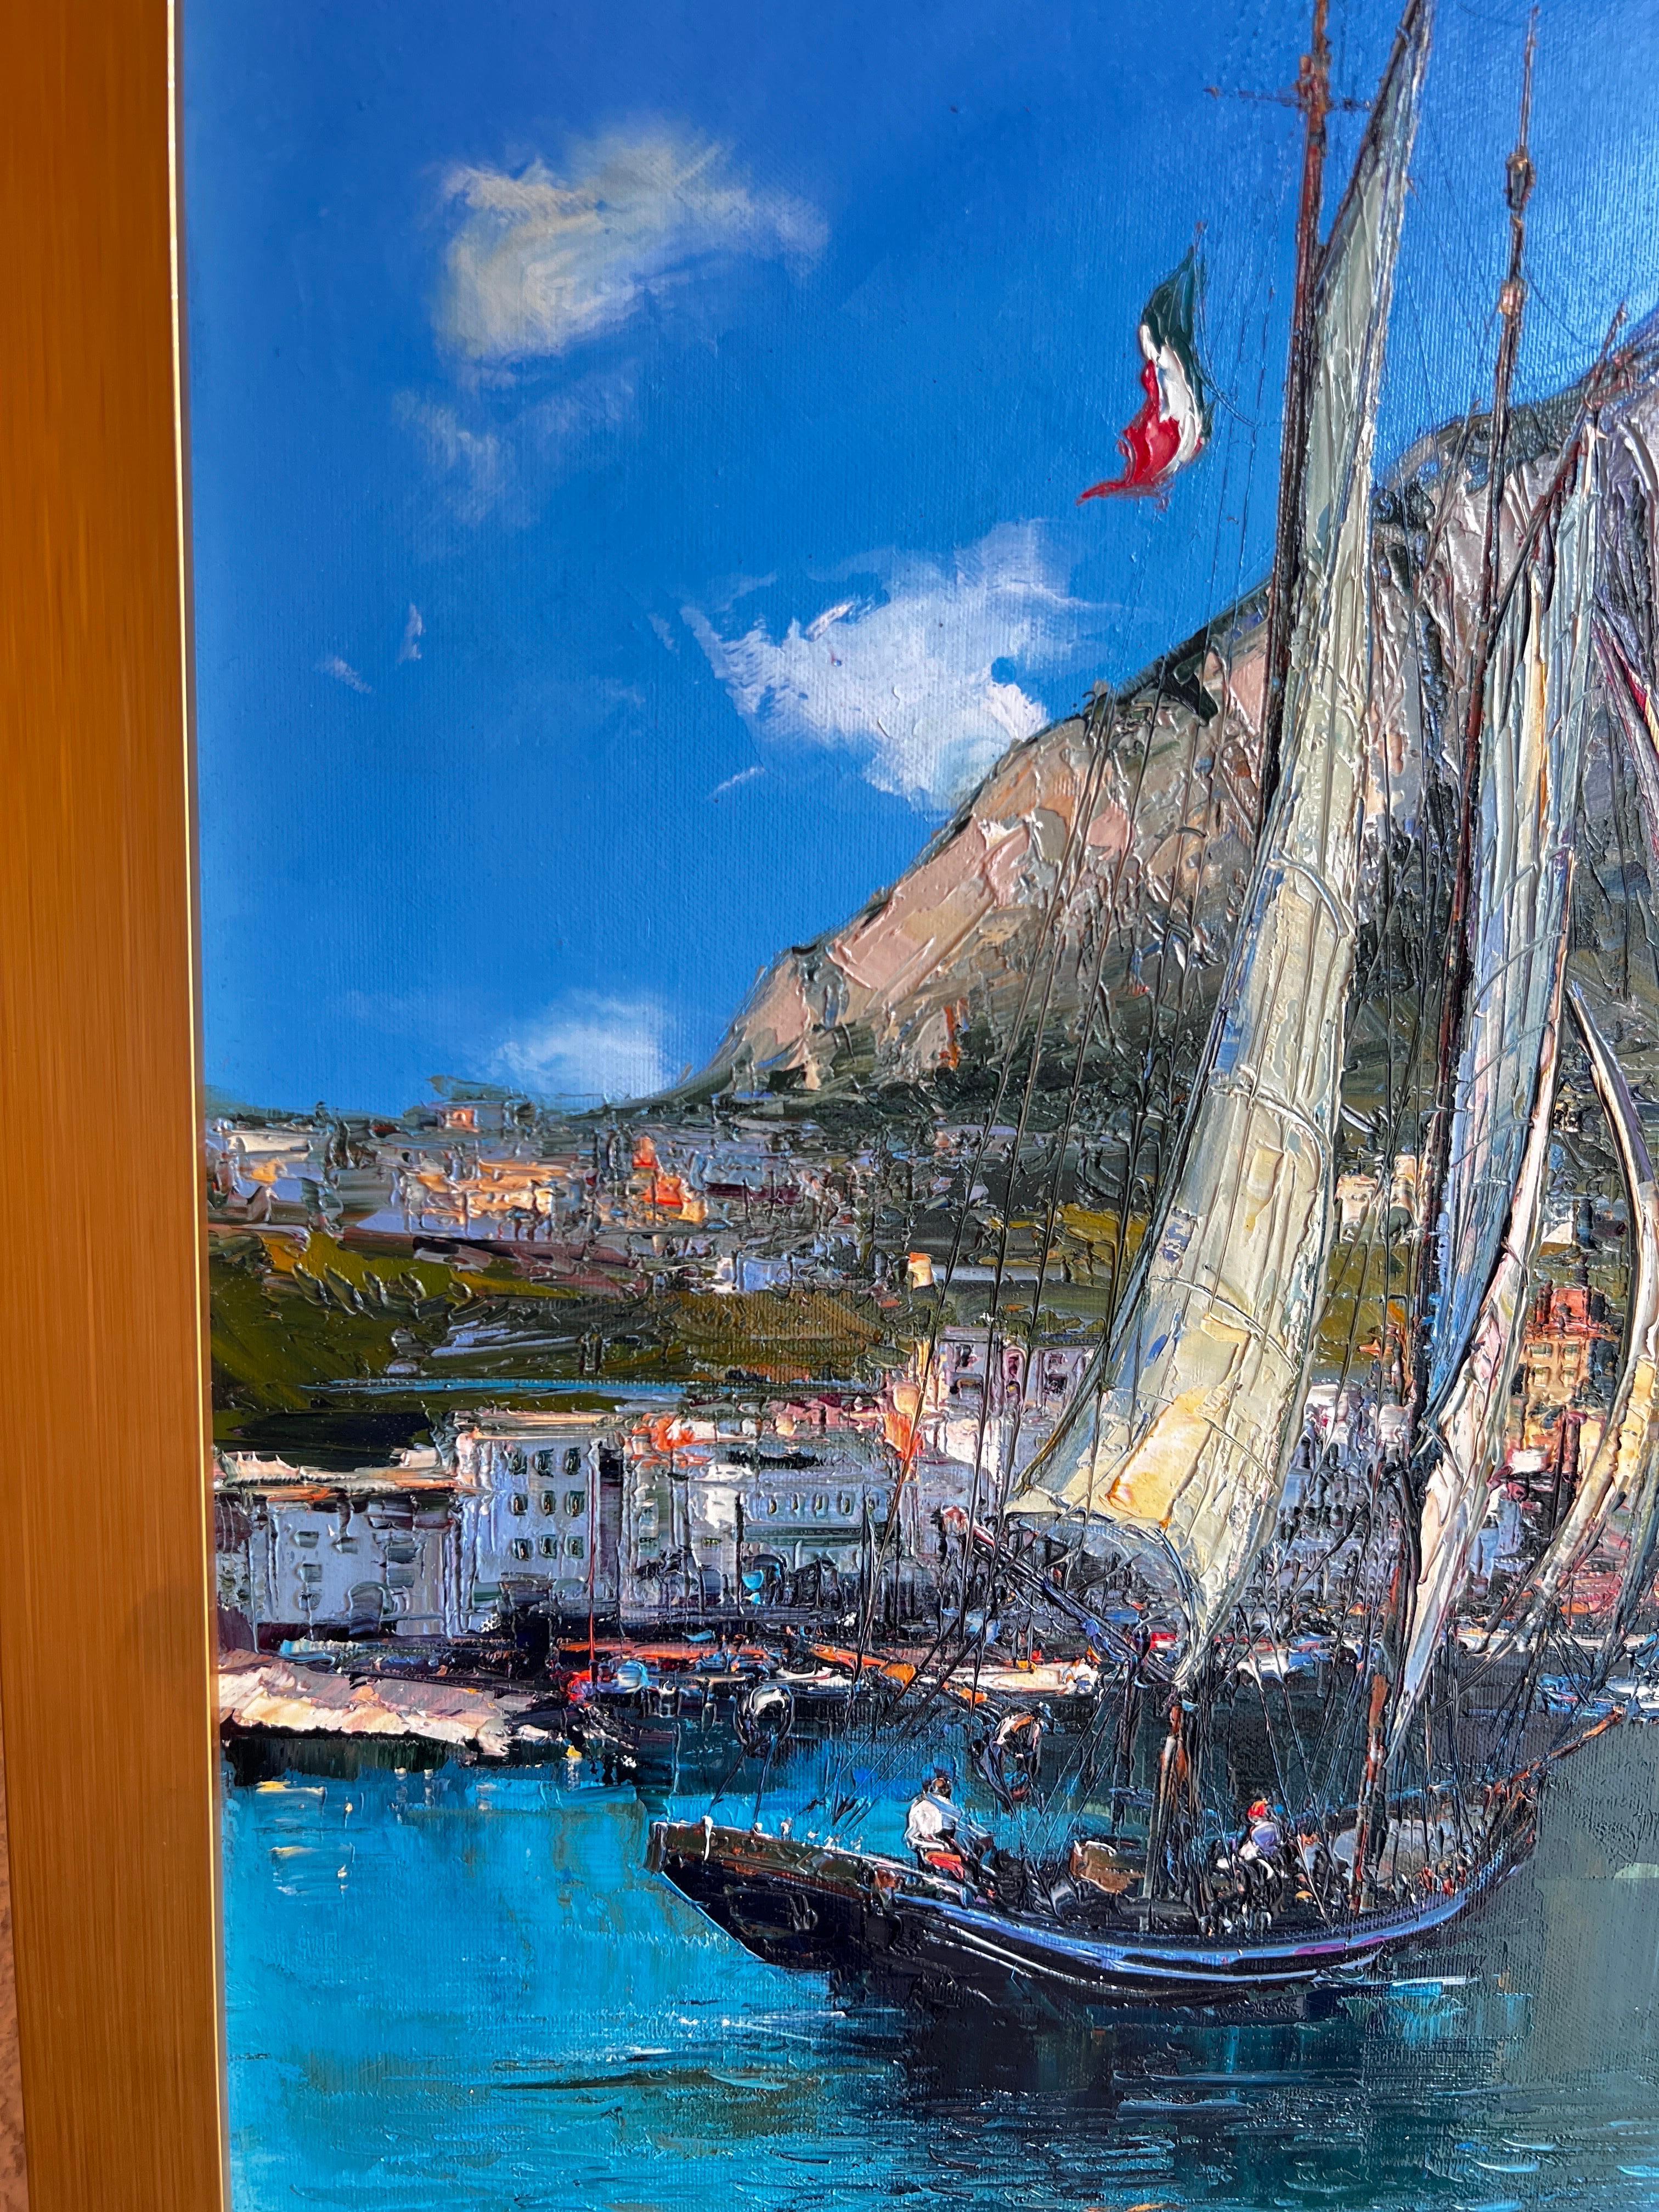 Introducing a magnificent artwork by the talented artist Narek—a joyful and serene composition inspired by the picturesque beauty of Capri, one of the artist's favorite places. This captivating painting embodies a sense of tranquility and invites